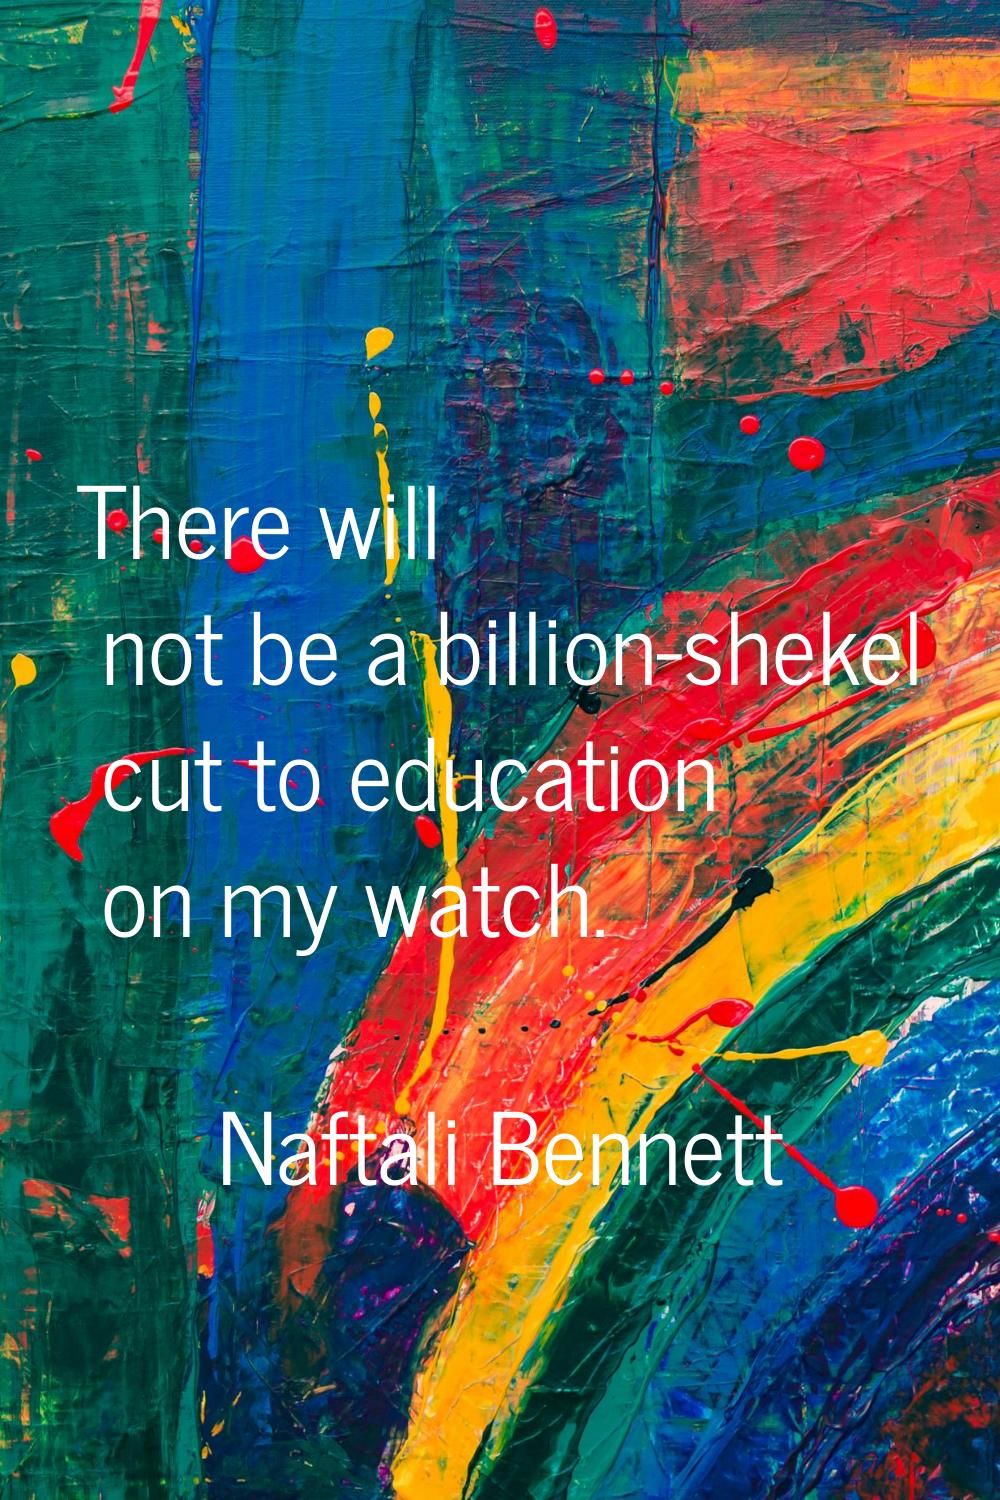 There will not be a billion-shekel cut to education on my watch.